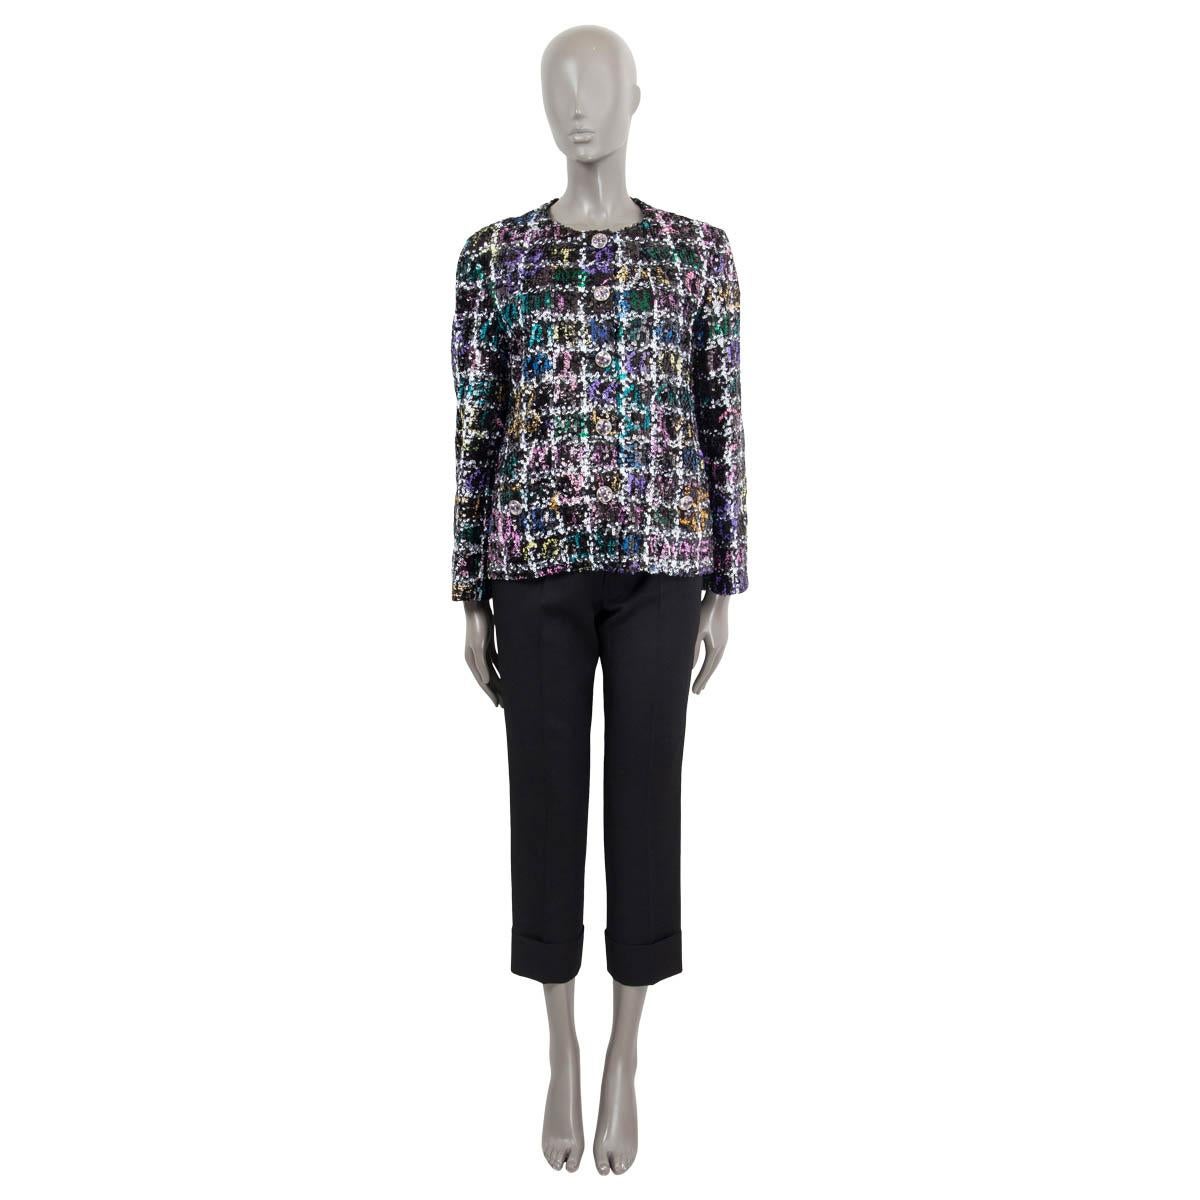 100% authentic Chanel 2022 Florence sequin embellished jacket in black, white, purple, turquoise, blue, yellow and pink. Open with 5 crystal embellished buttons and has 2 buttoned front patch-pockets and buttoned cuffs. Lined in black silk. Has been